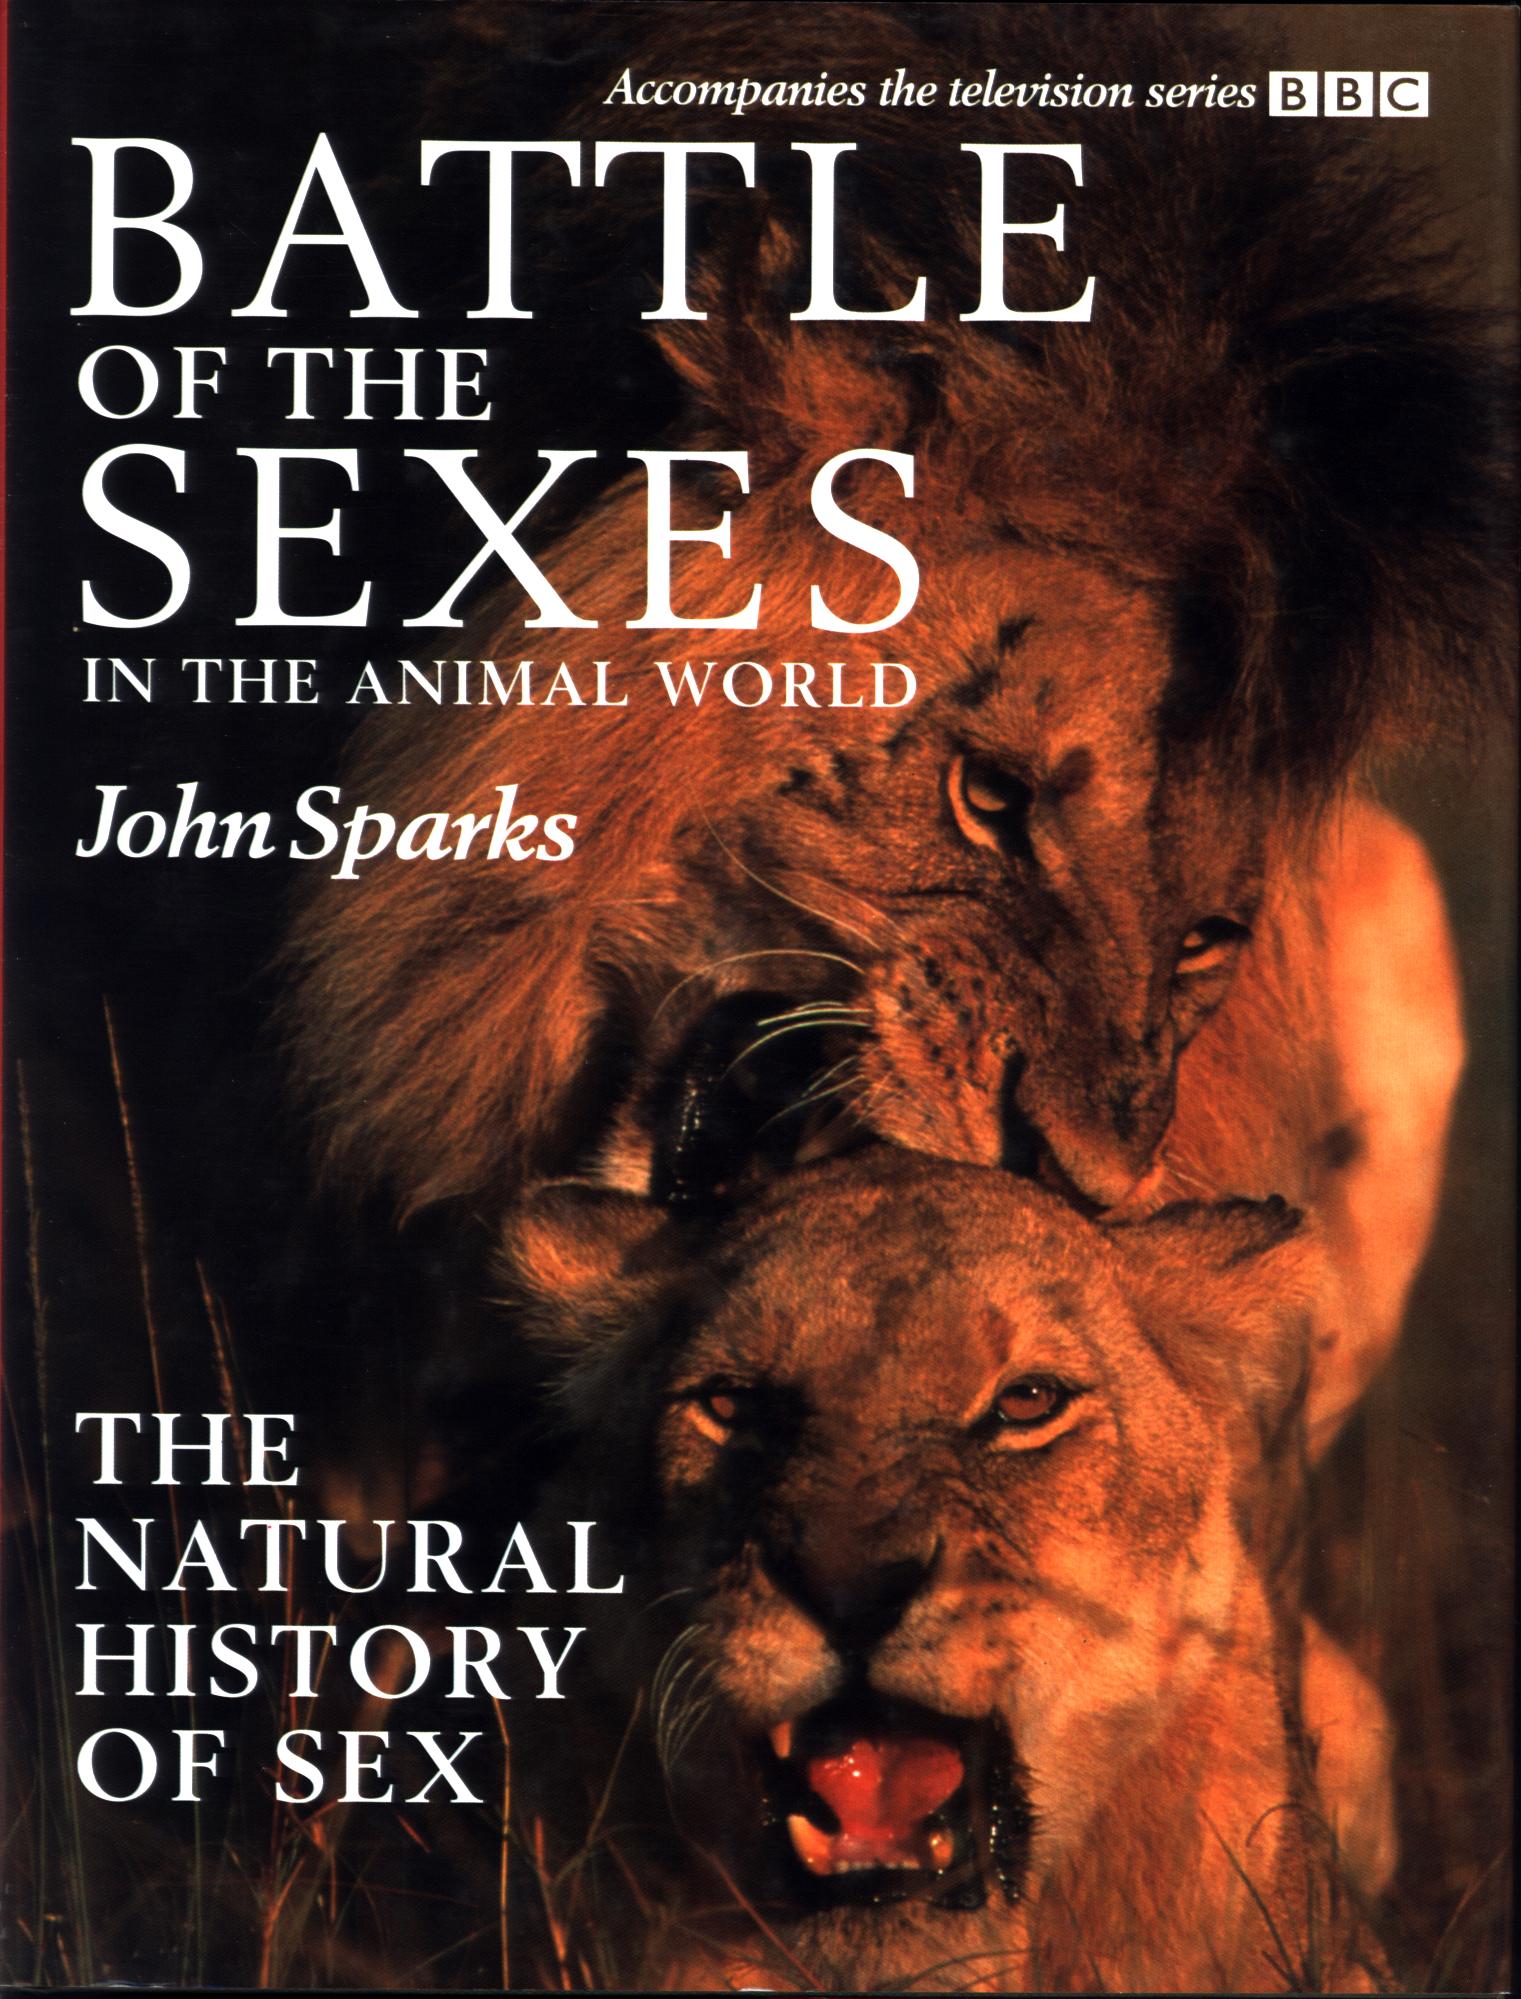 BATTLE OF THE SEXES IN THE ANIMAL WORLD: the natural history of sex.